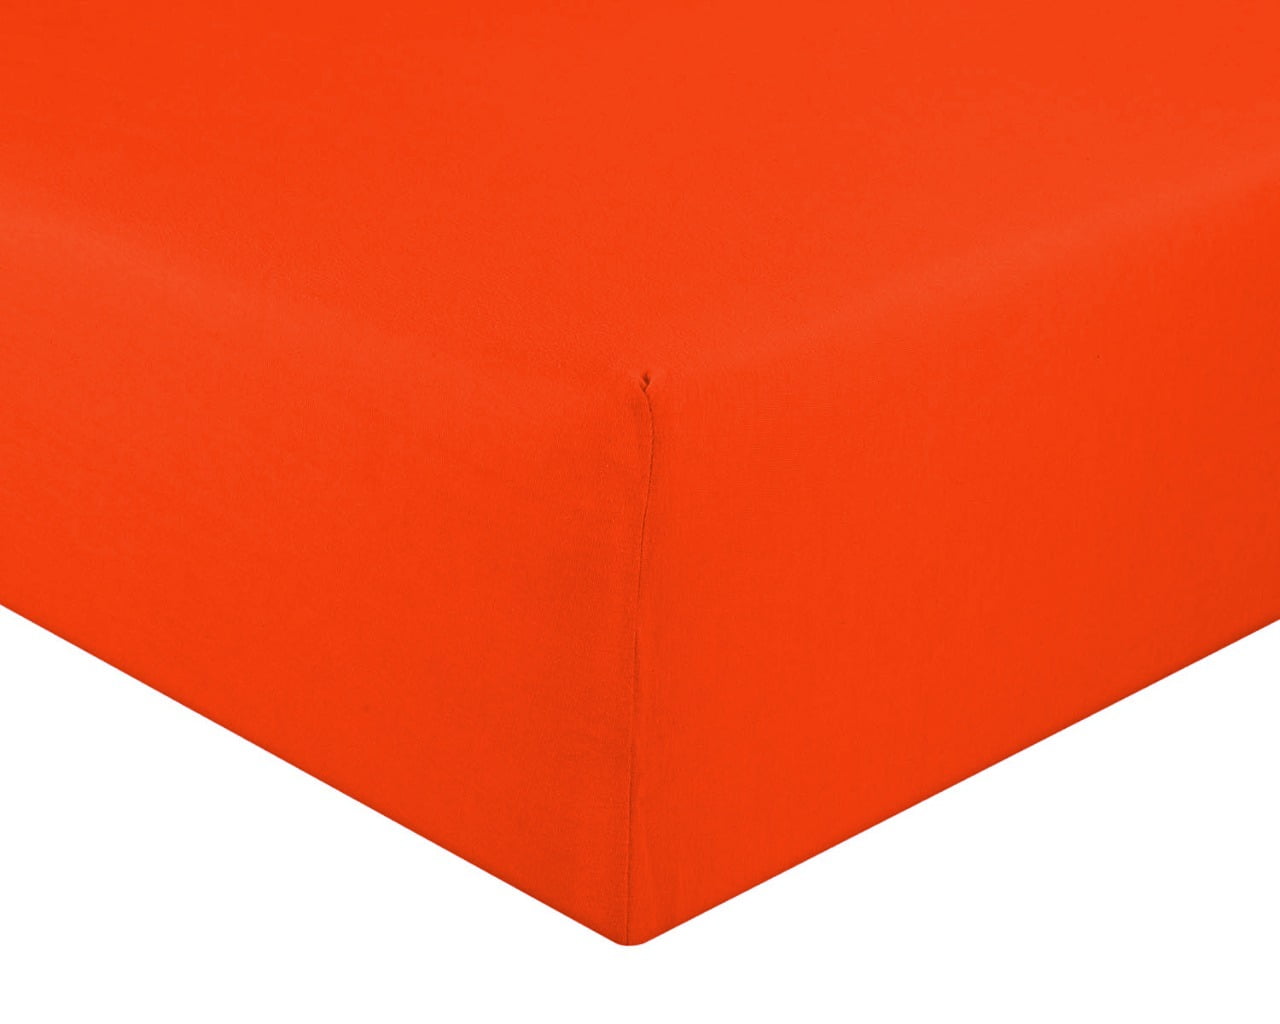 Jersey Bed Fitted - Orange